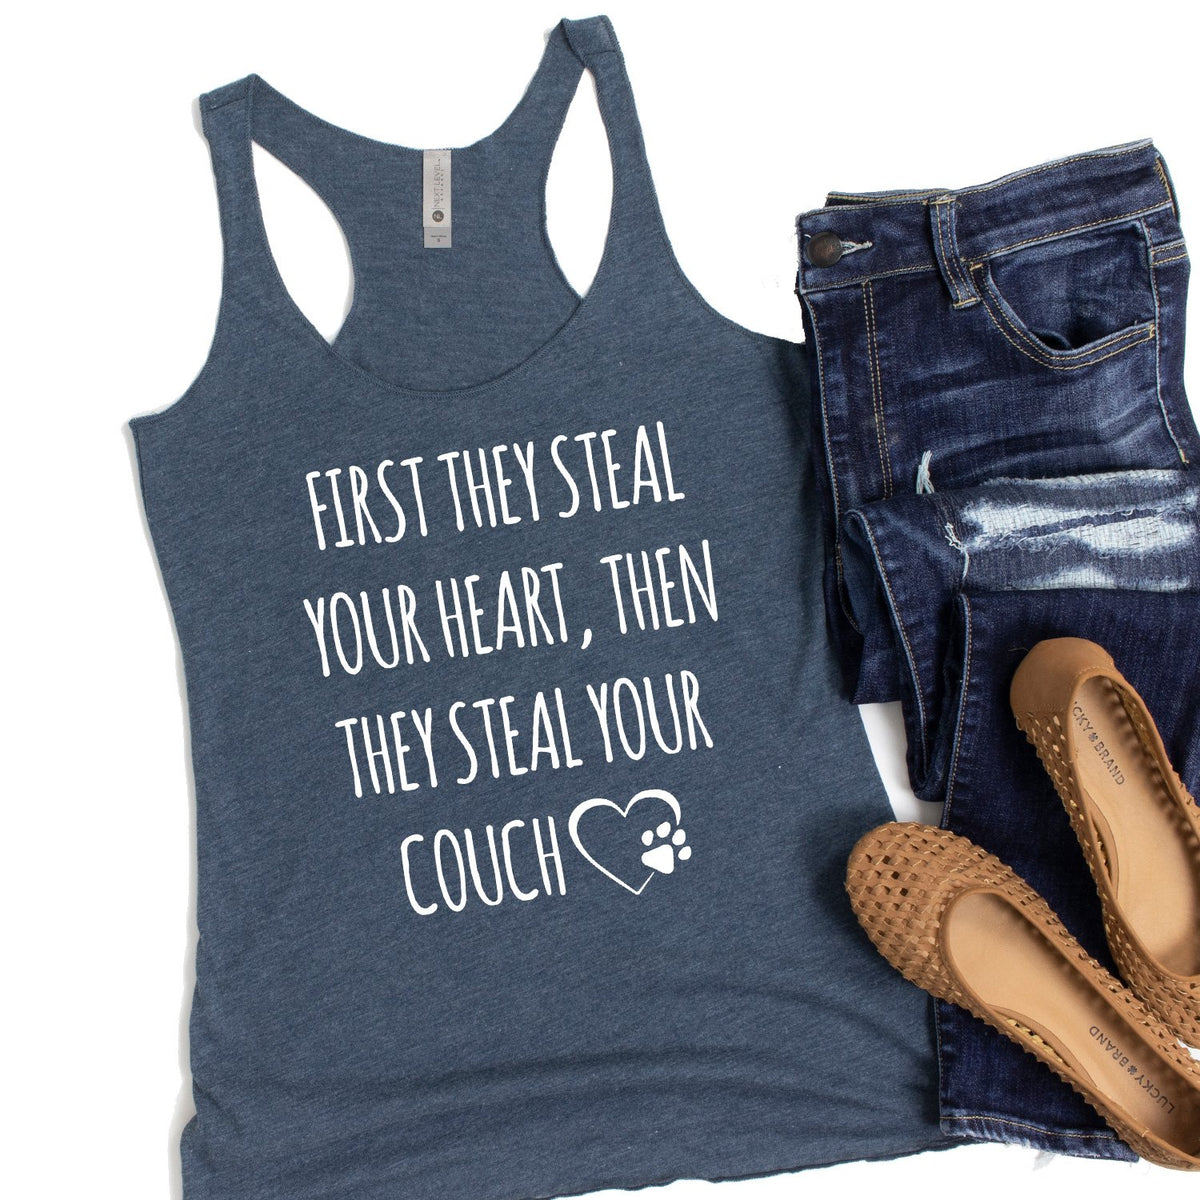 First They Steal Your Heart, Then They Steal Your Couch - Tank Top Racerback